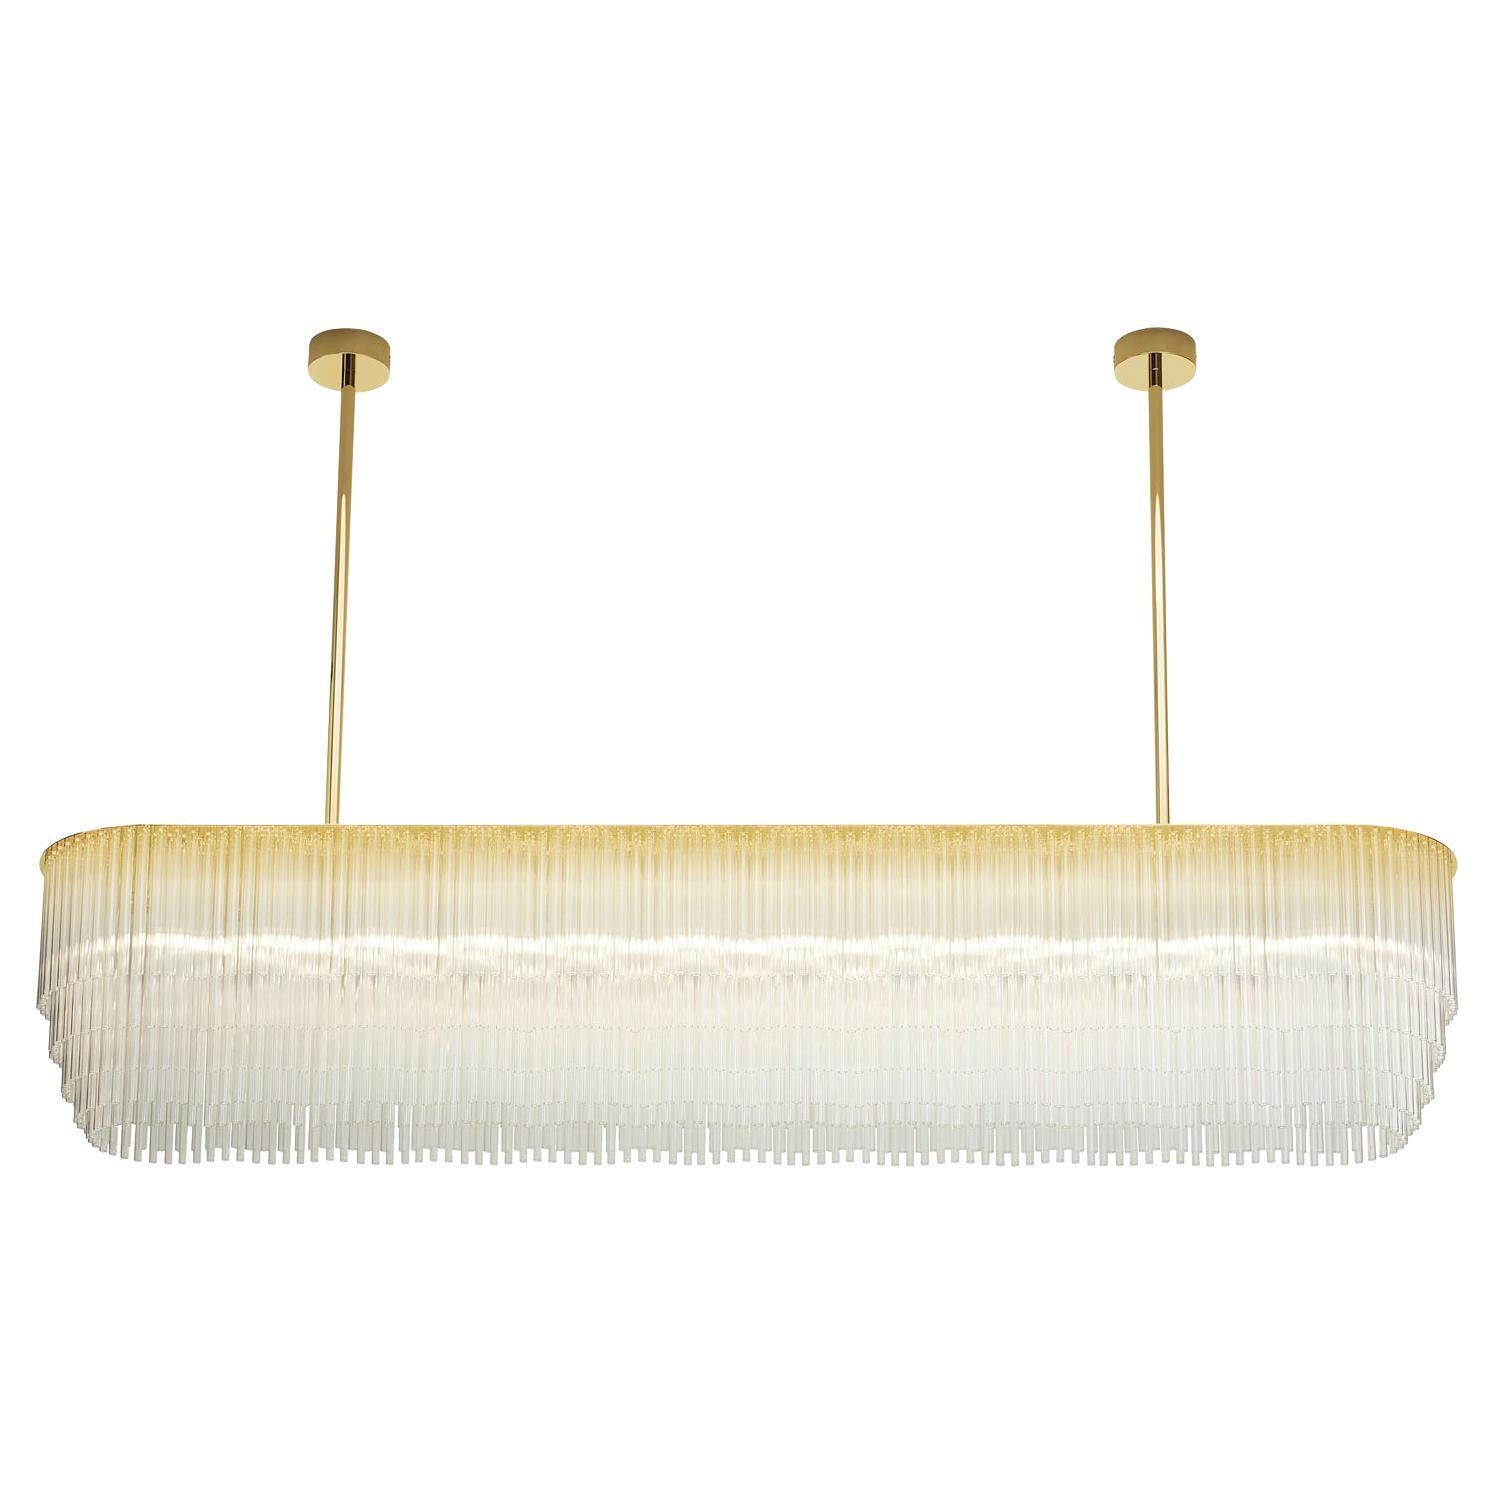 Linear Chandelier 1370mm / 54" in Polished Brass with Tiered Glass Profile For Sale